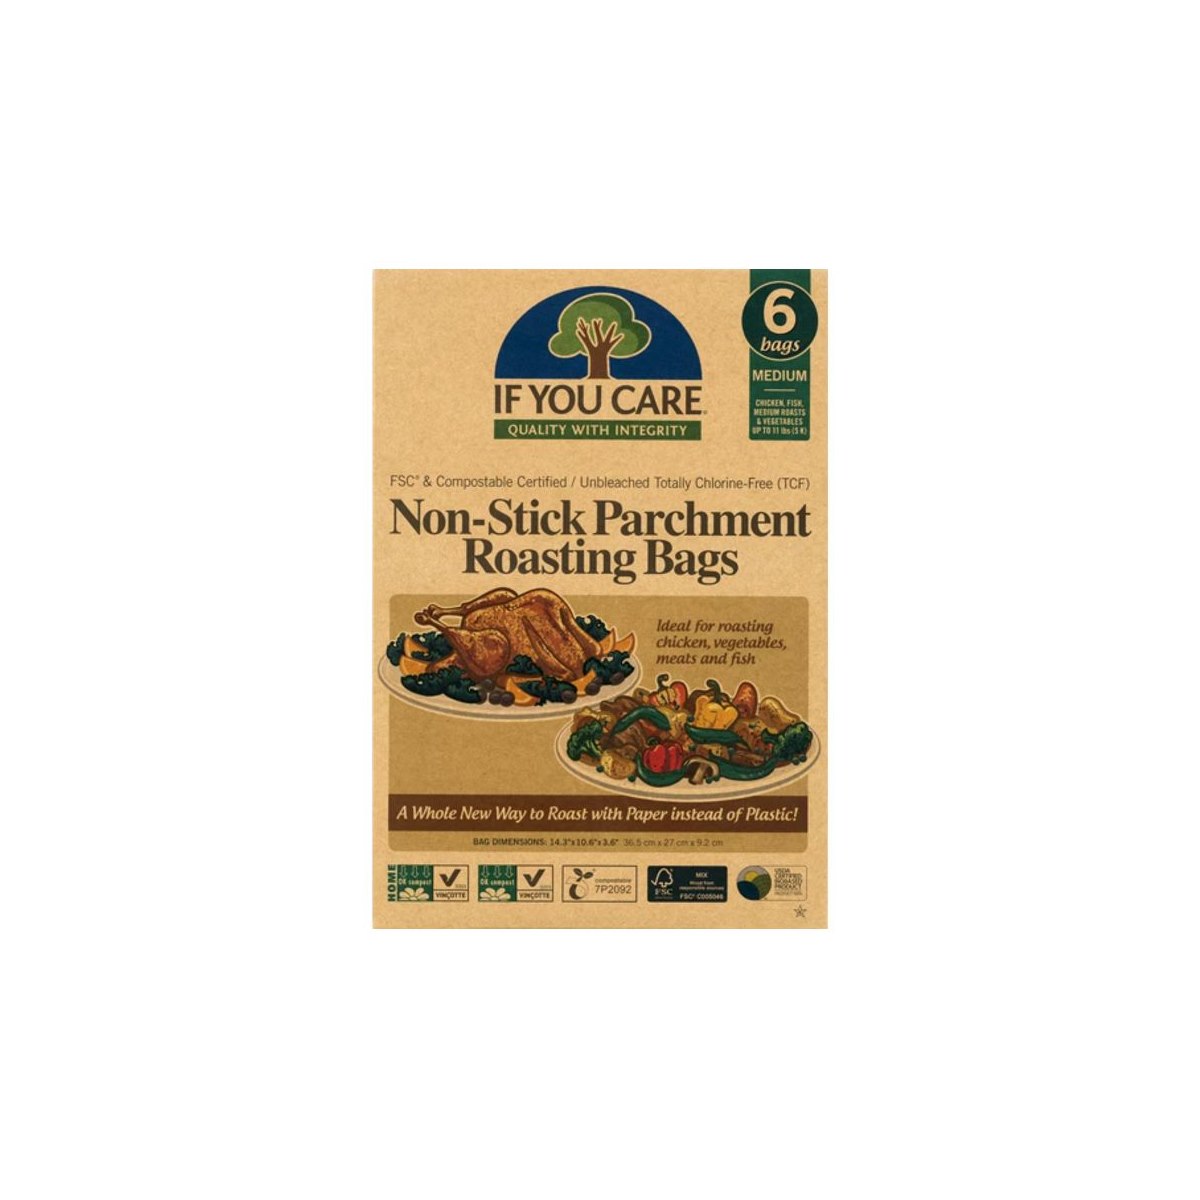 If You Care Non - Stick Parchment Roasting Bags